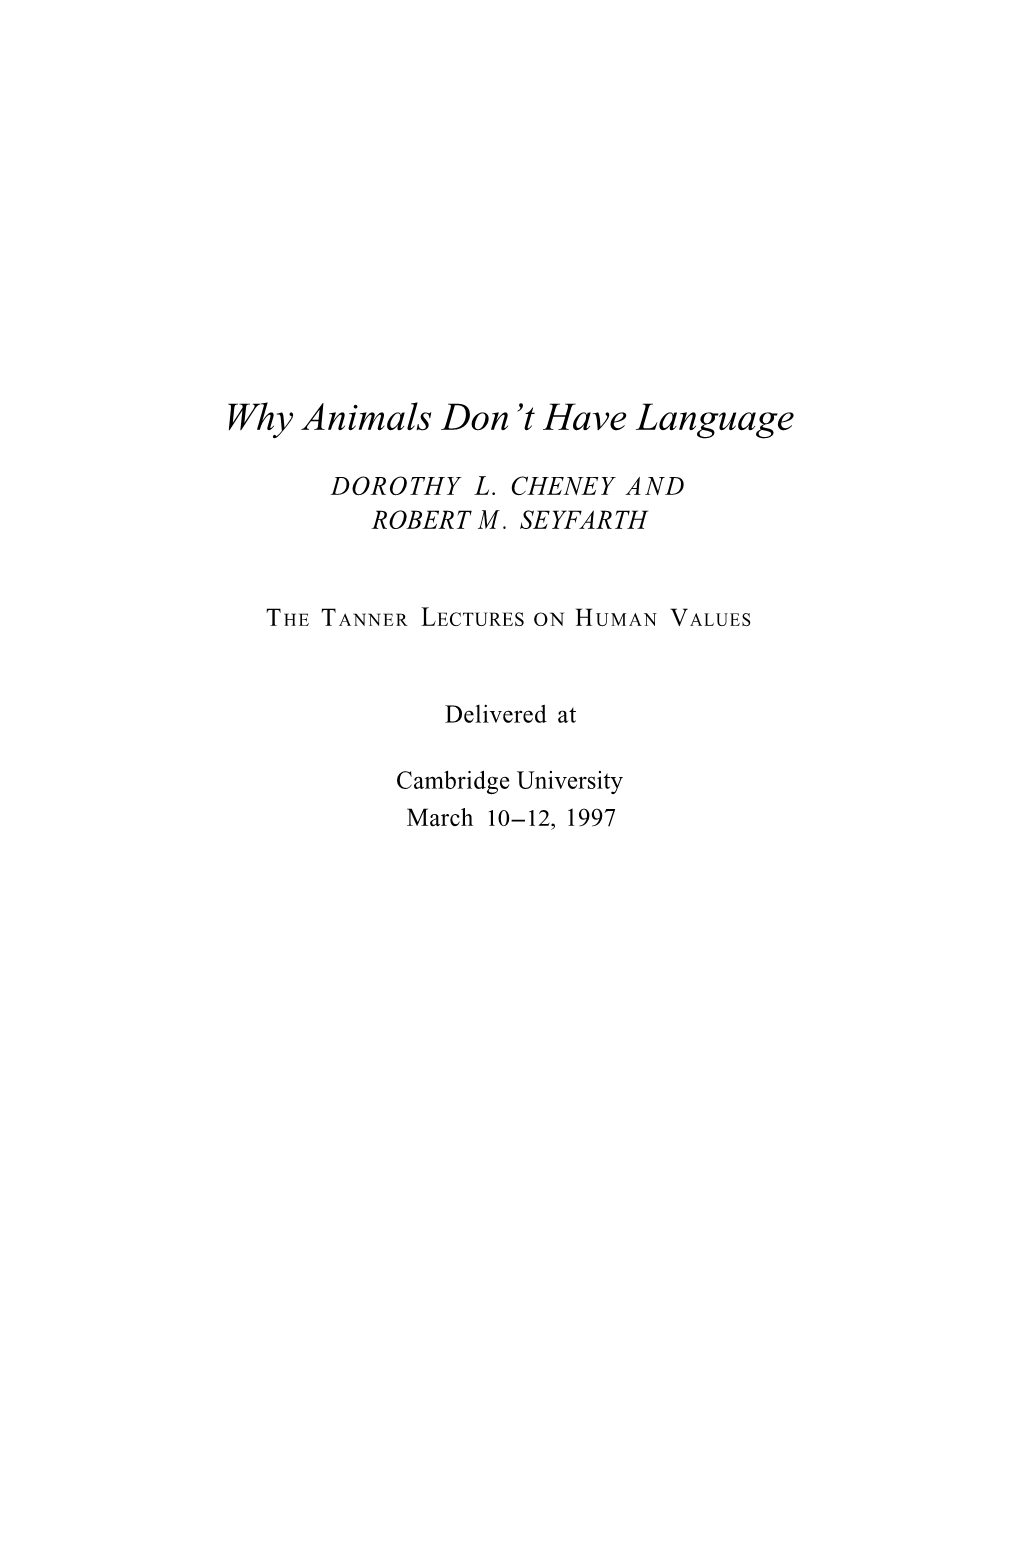 Why Animals Don't Have Language 209